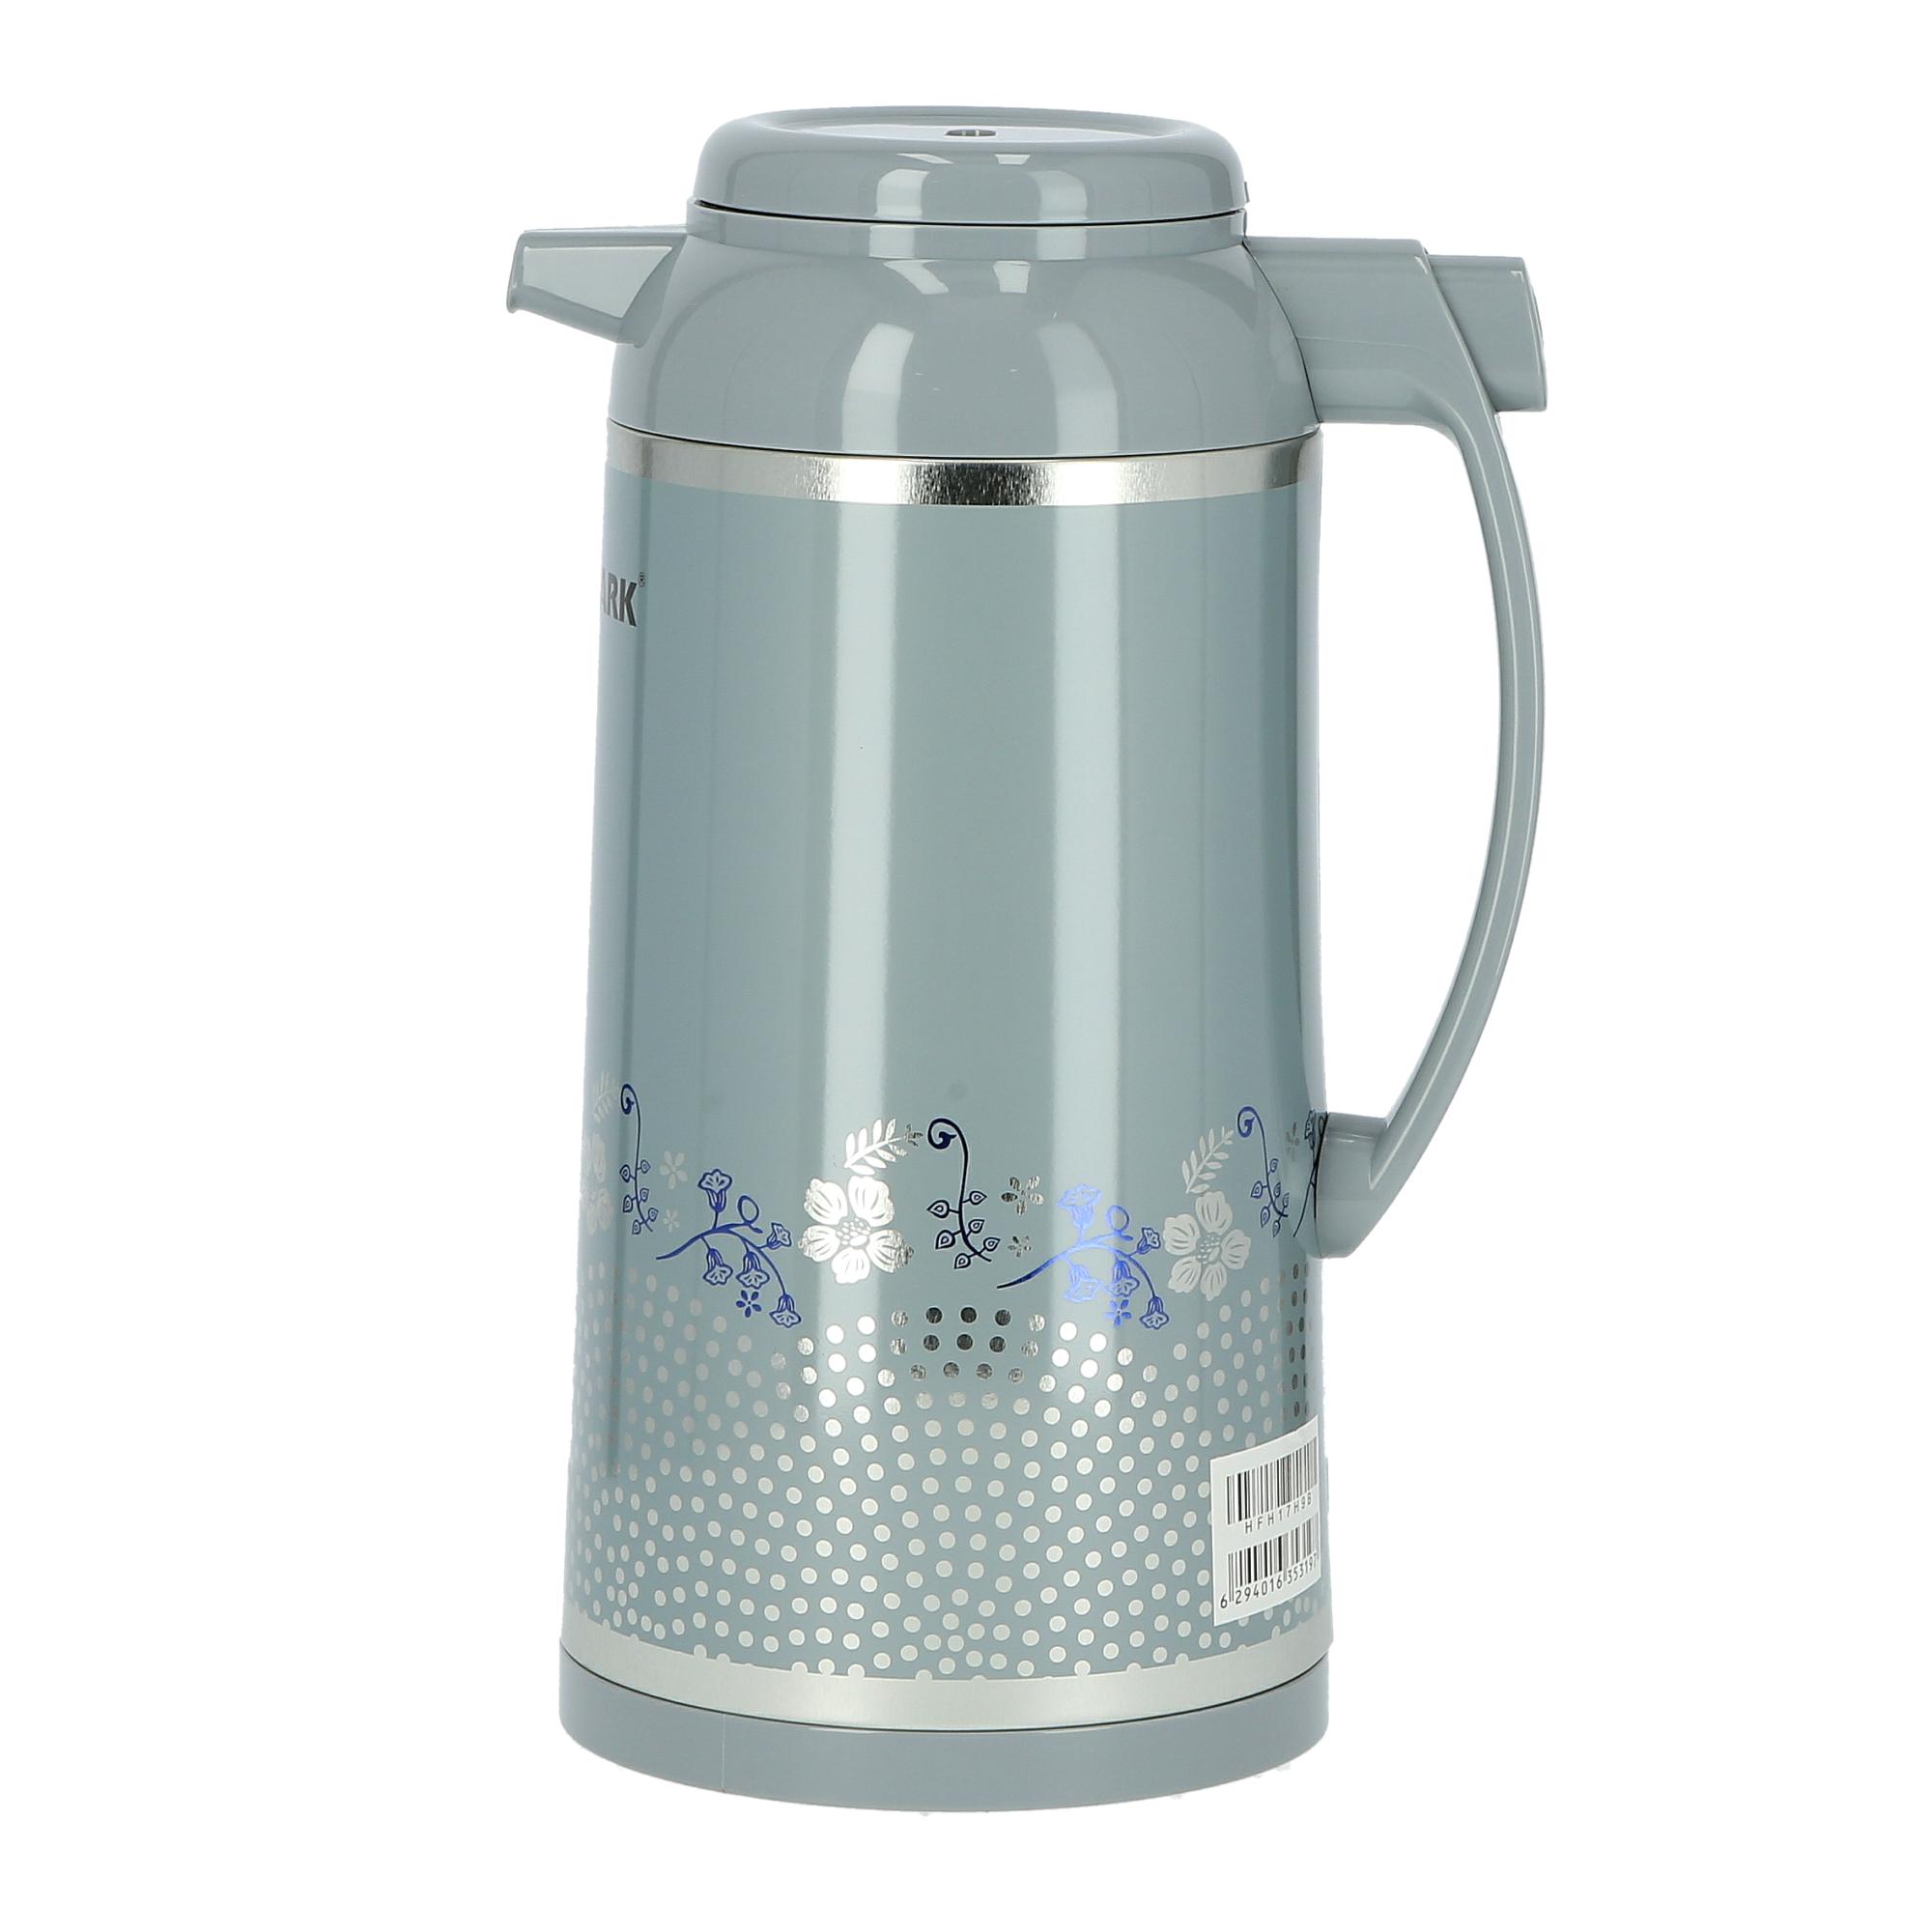 Olsenmark Vacuum Flask With Glass Liner - Thermos Flask With Double Wall Design -Jug Flask, Vacuum